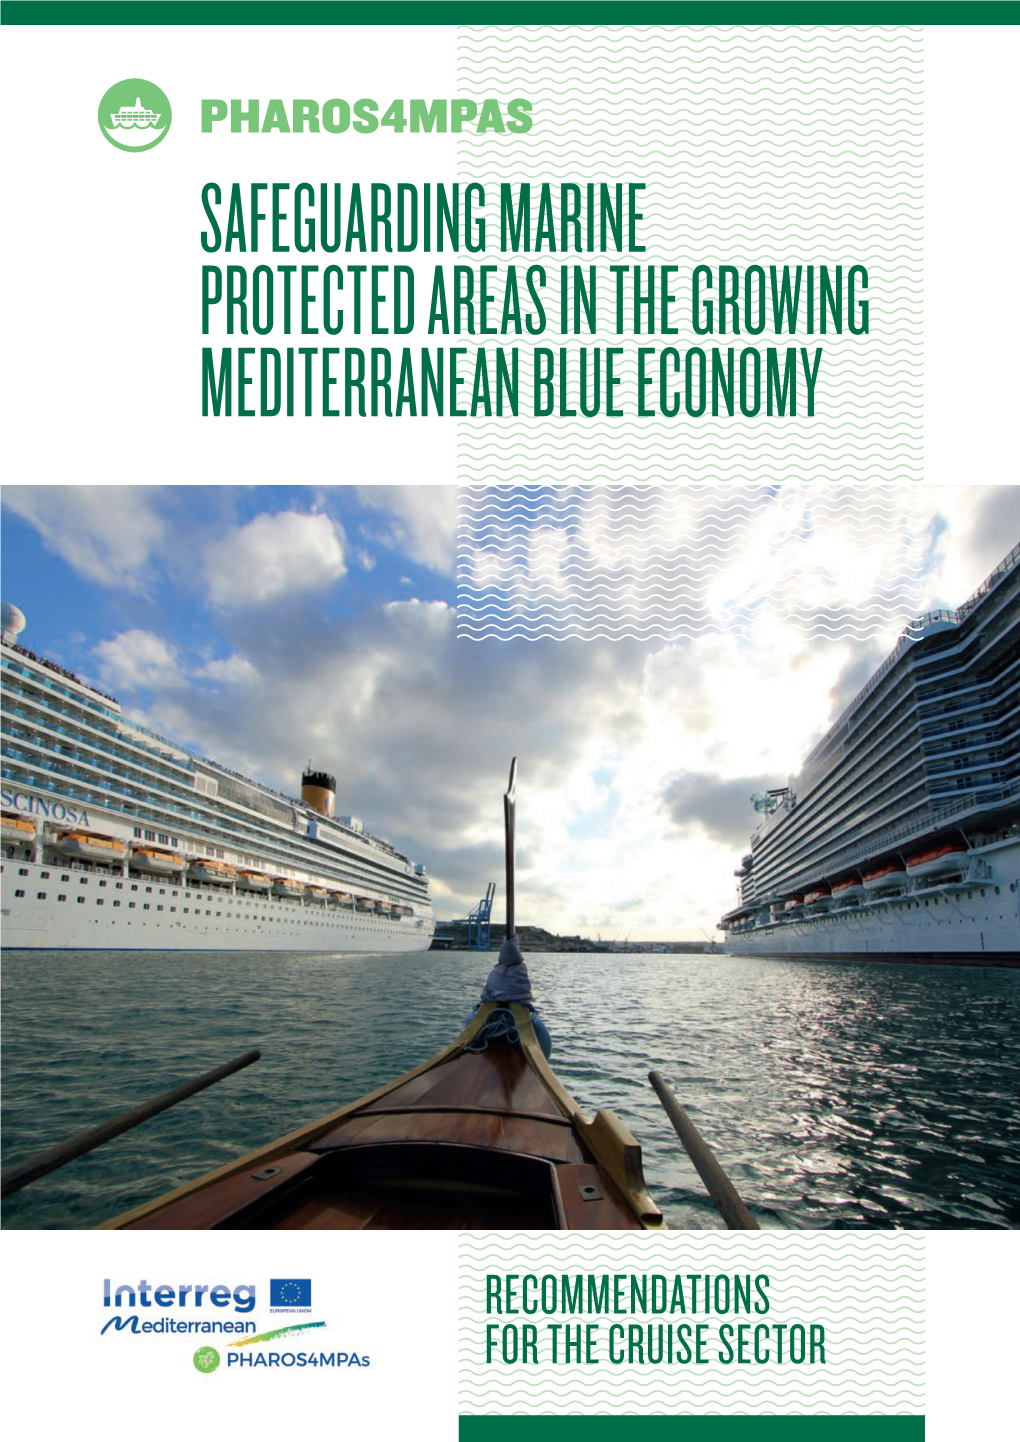 Pharos4mpas Safeguarding Marine Protected Areas in the Growing Mediterranean Blue Economy